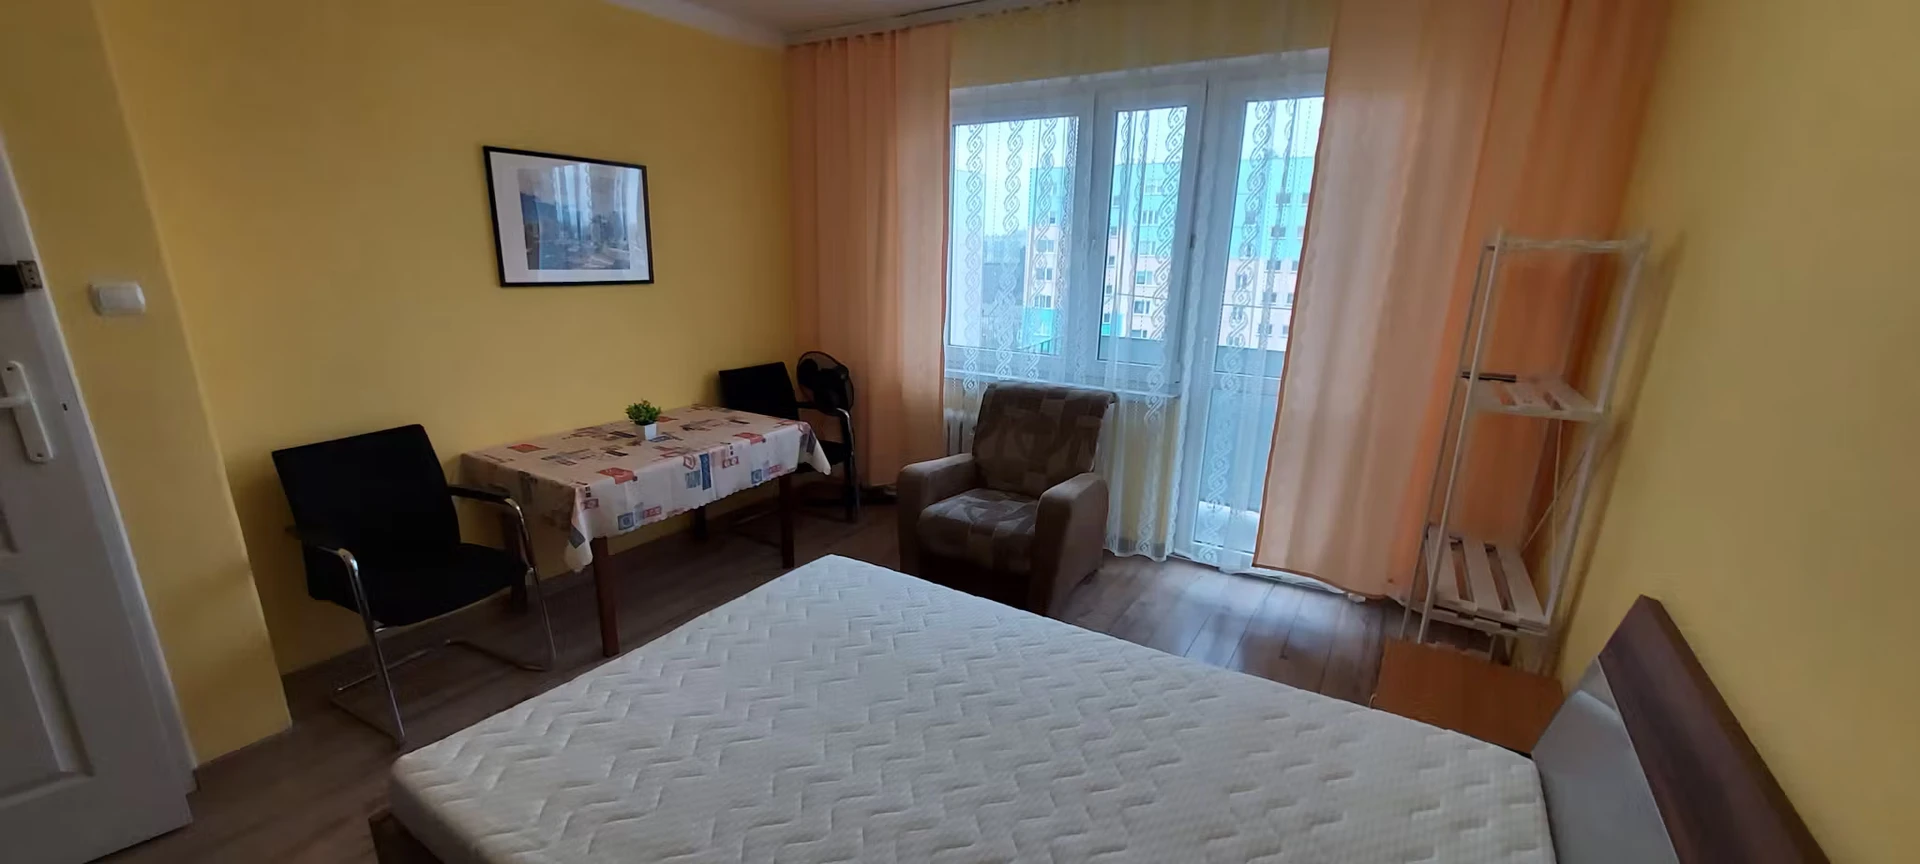 Room for rent in a shared flat in Rzeszów